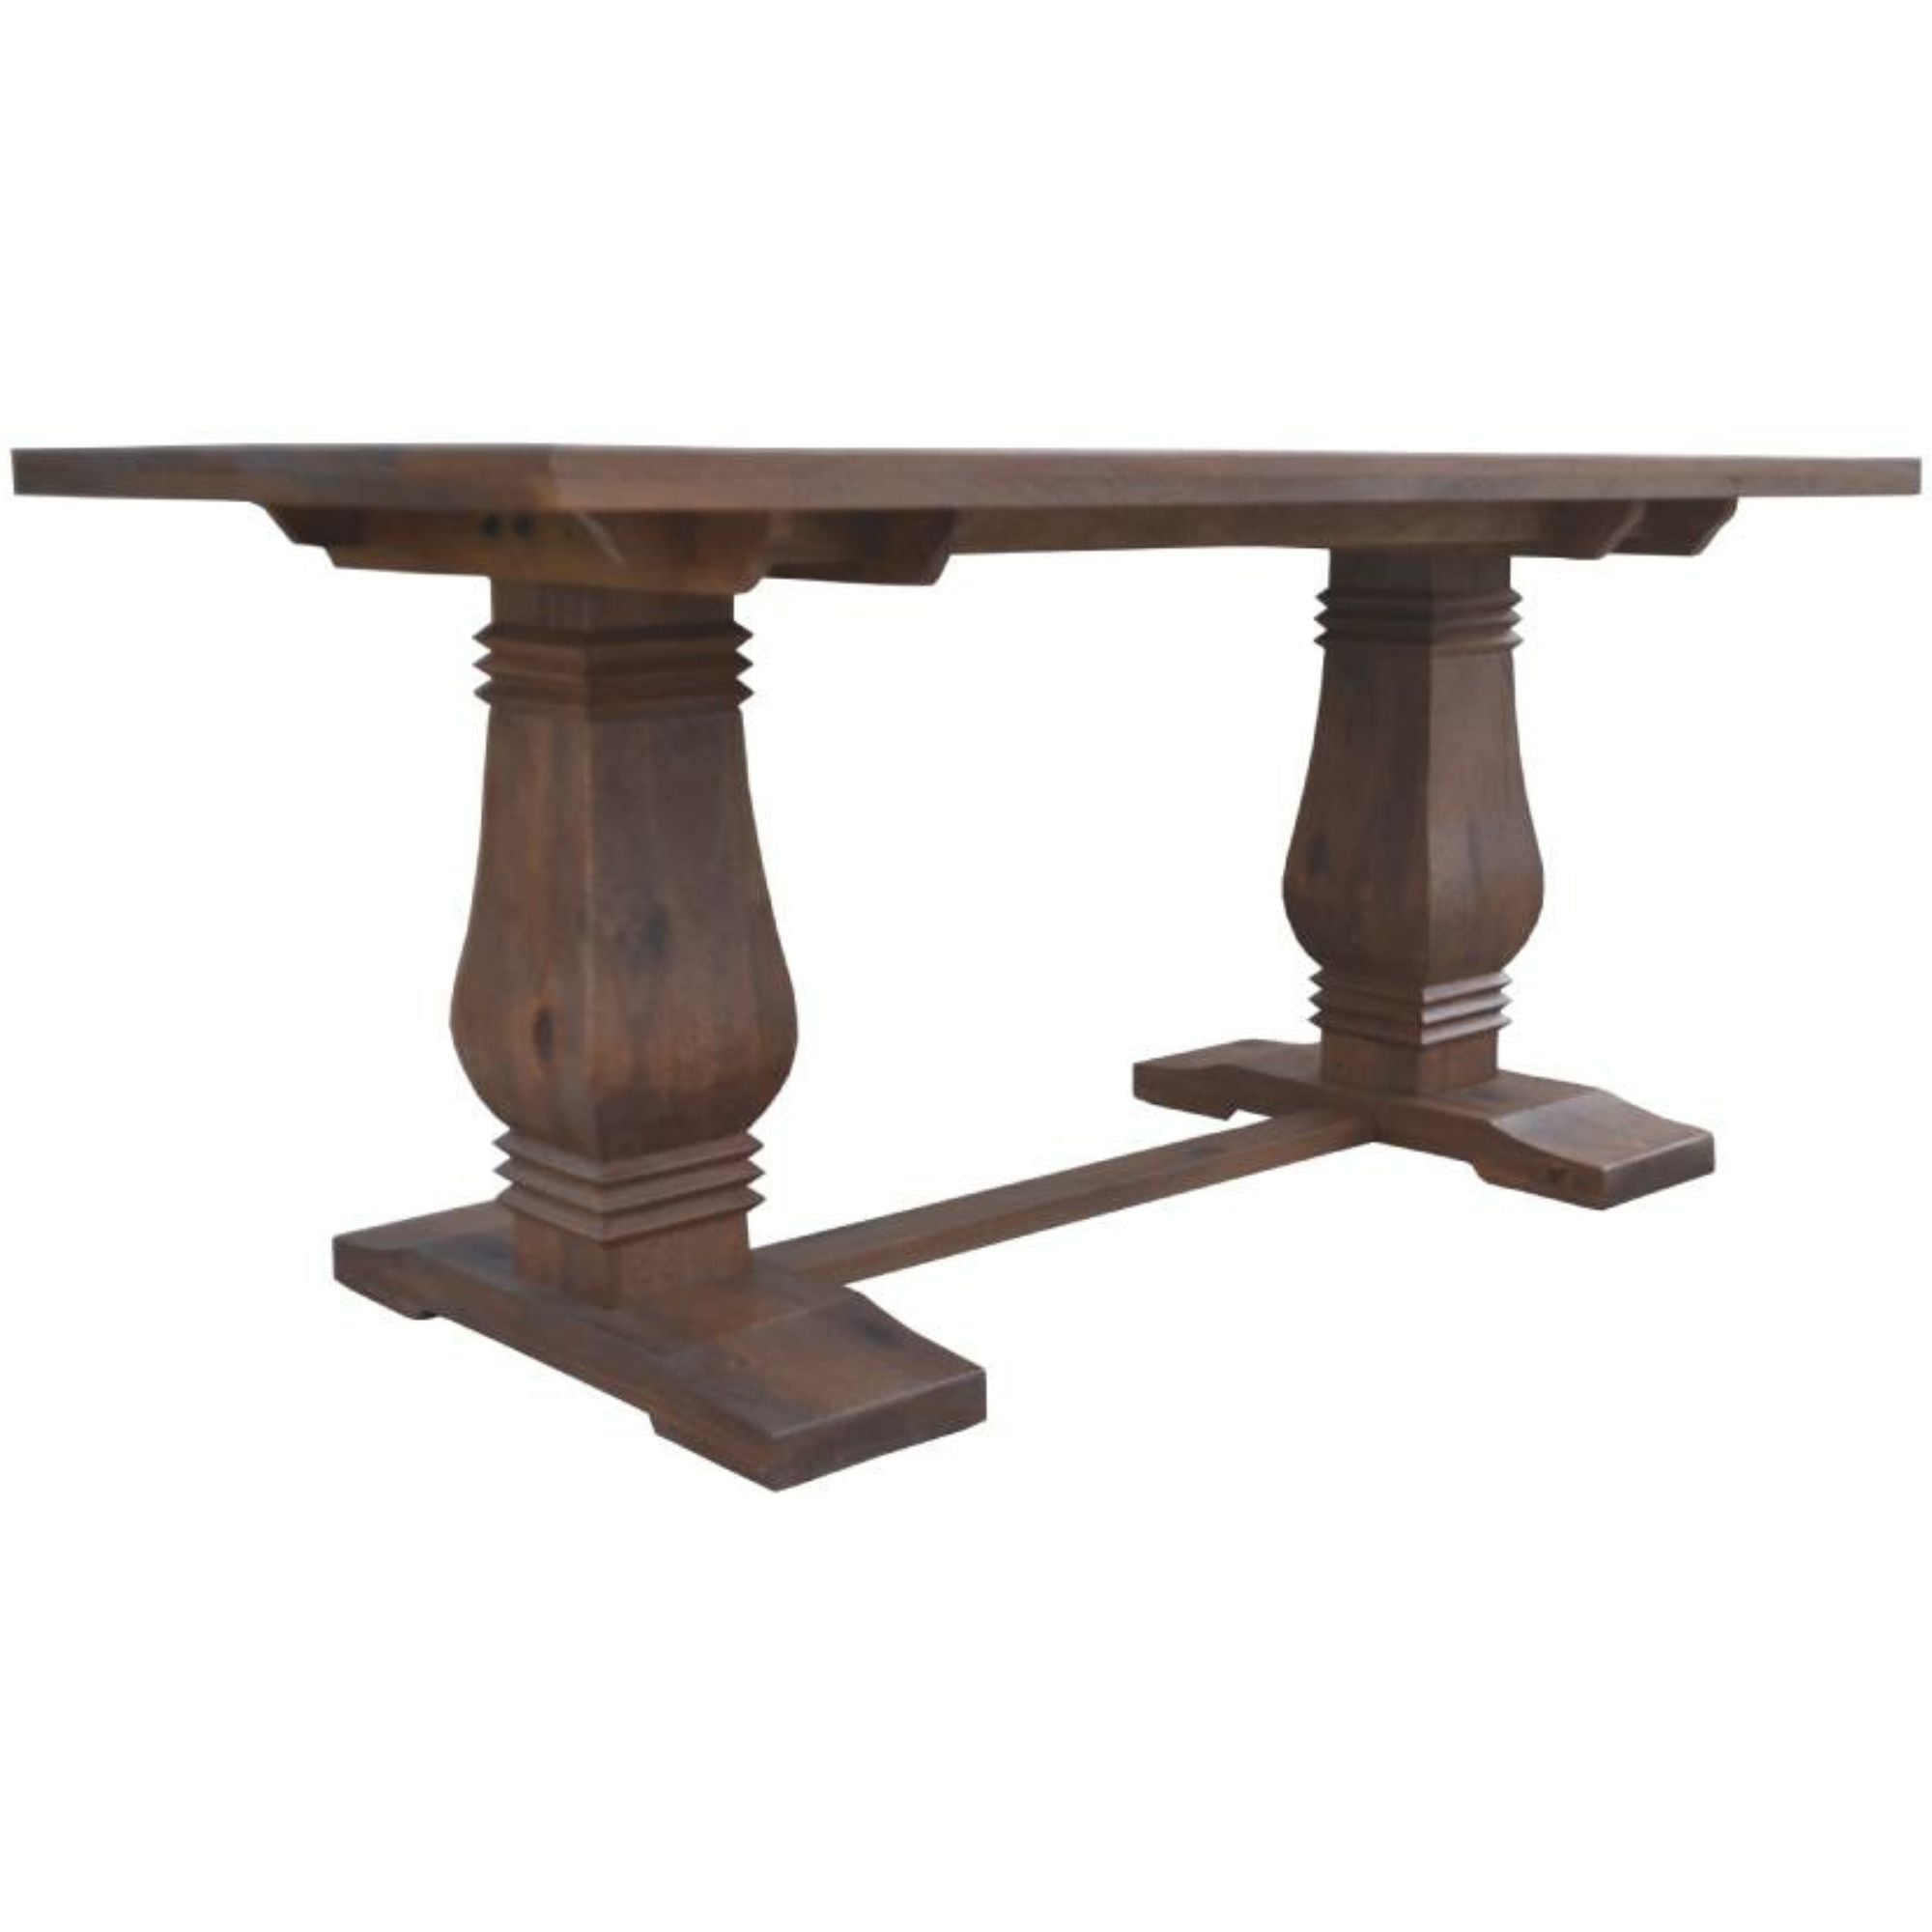 High Dining Table 200Cm French Provincial Pedestal Solid Timber Wood